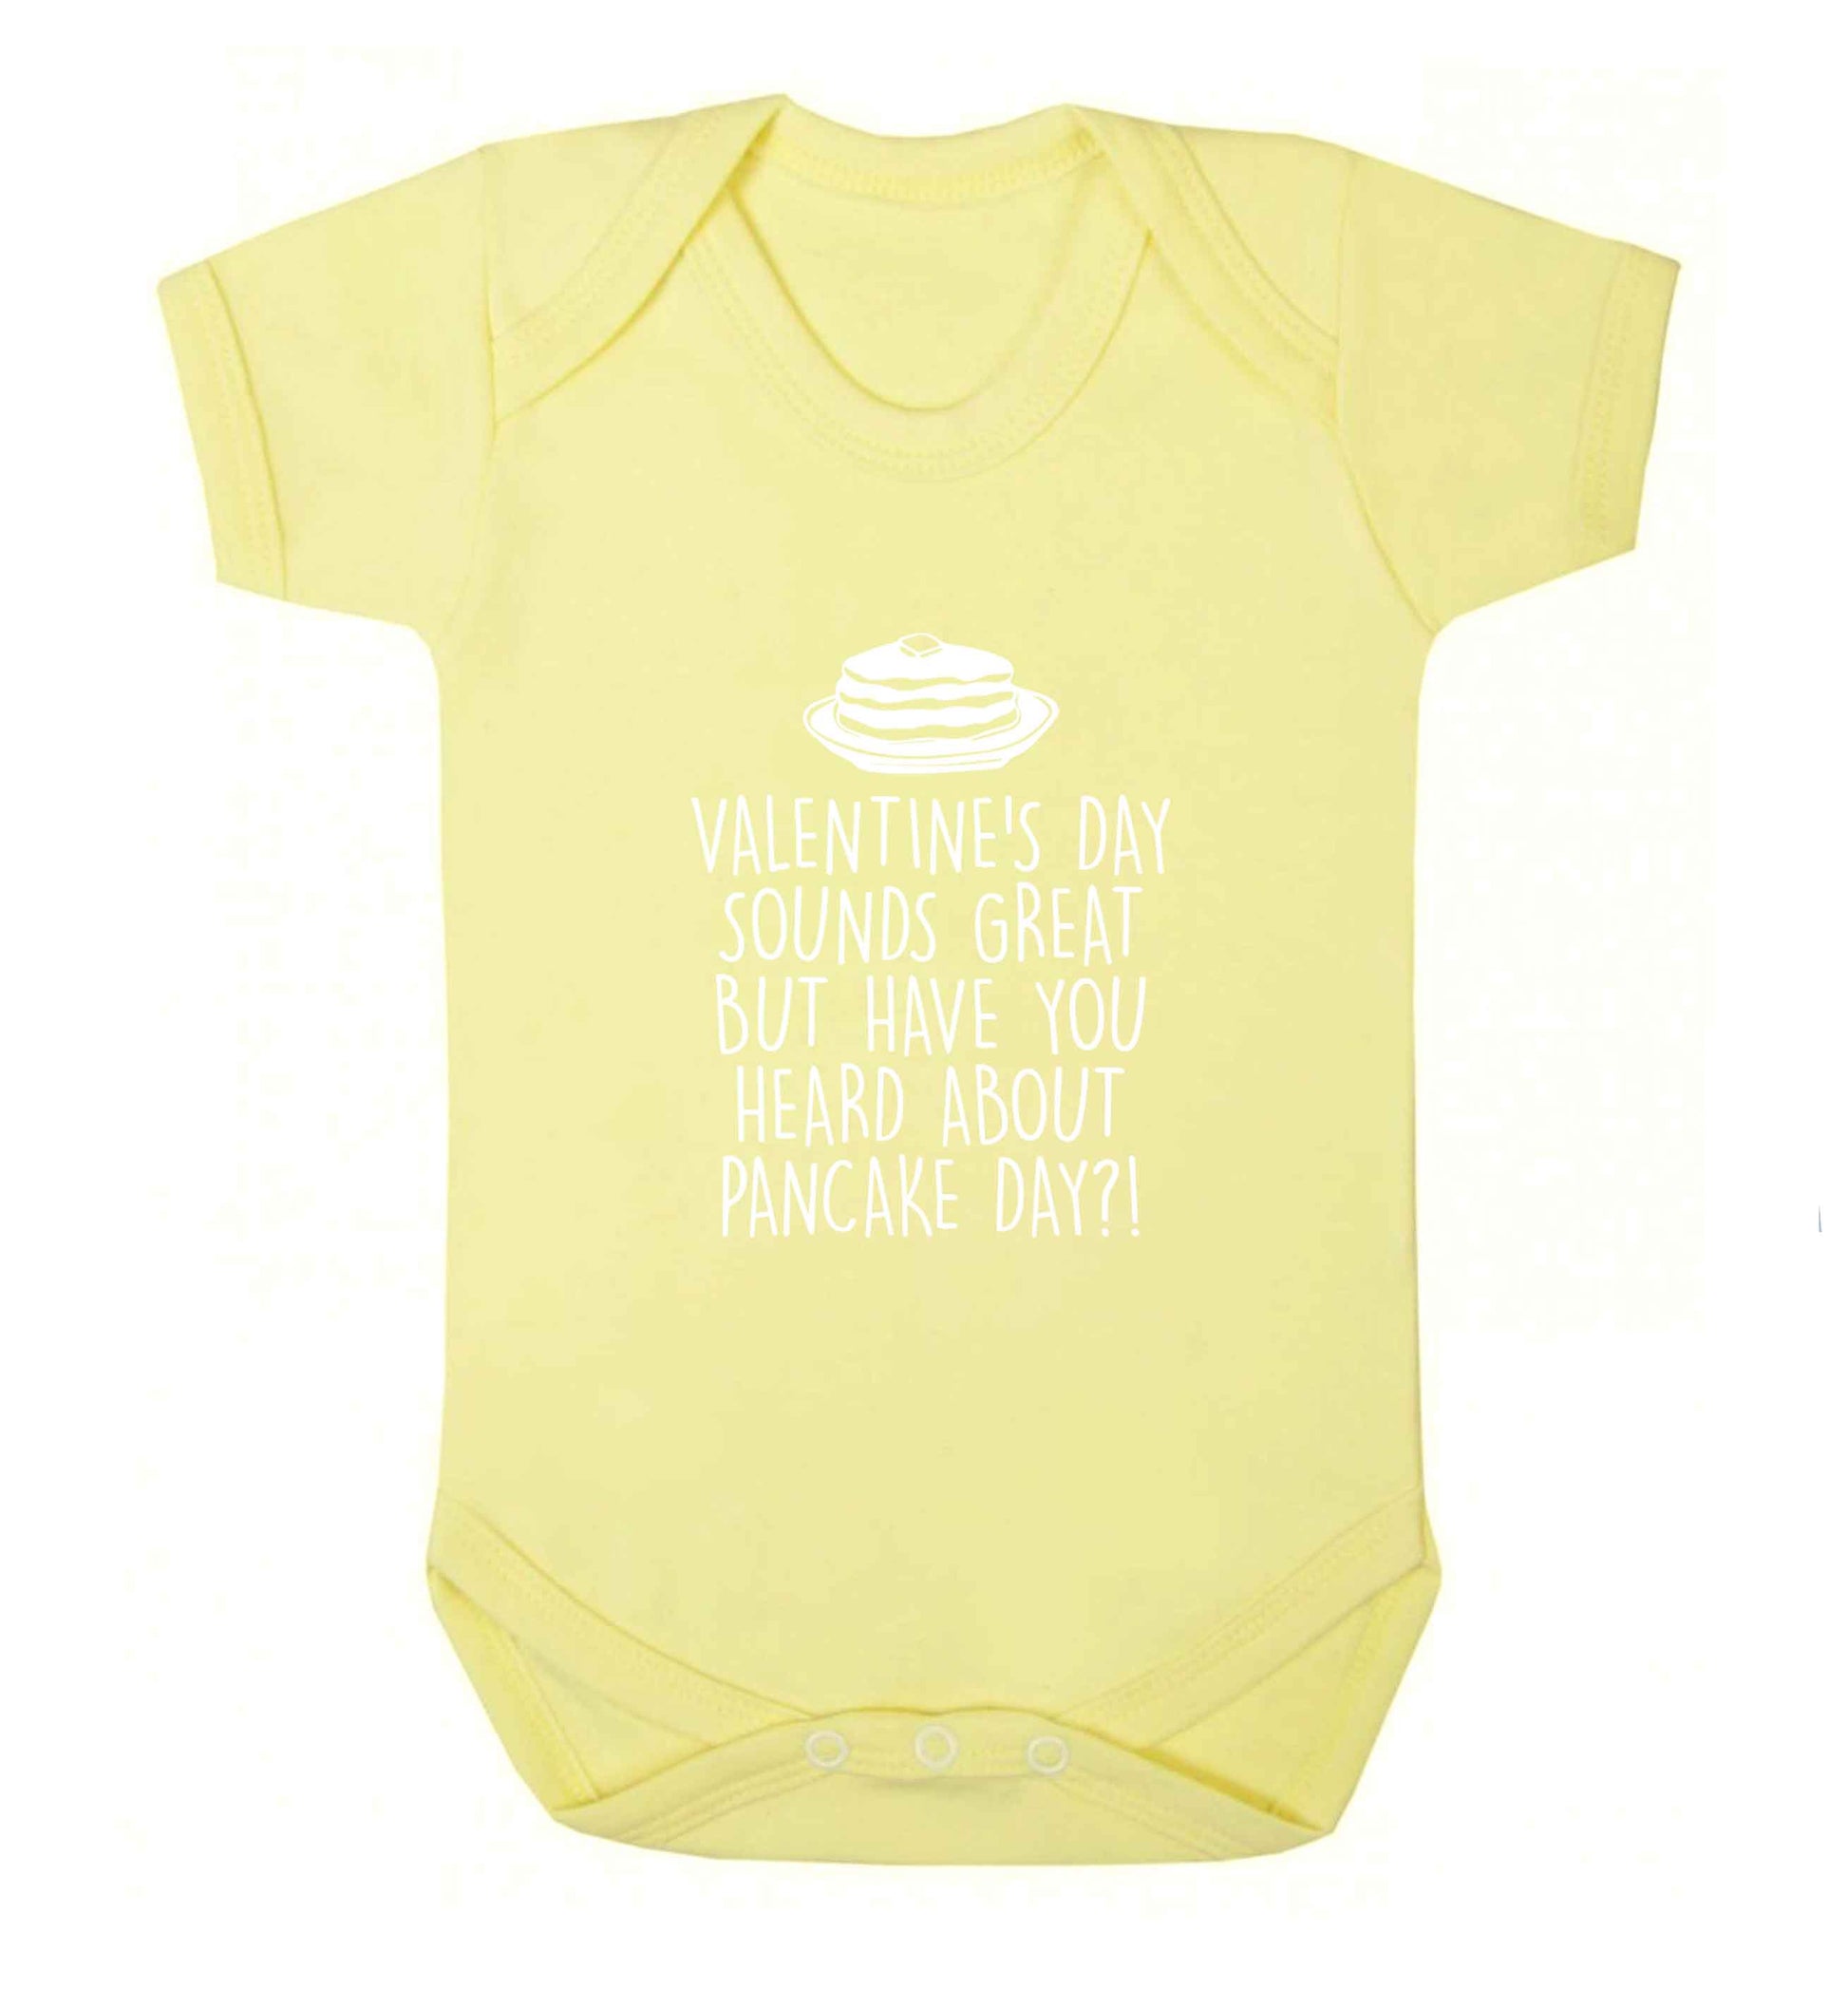 Valentine's day sounds great but have you heard about pancake day?! baby vest pale yellow 18-24 months